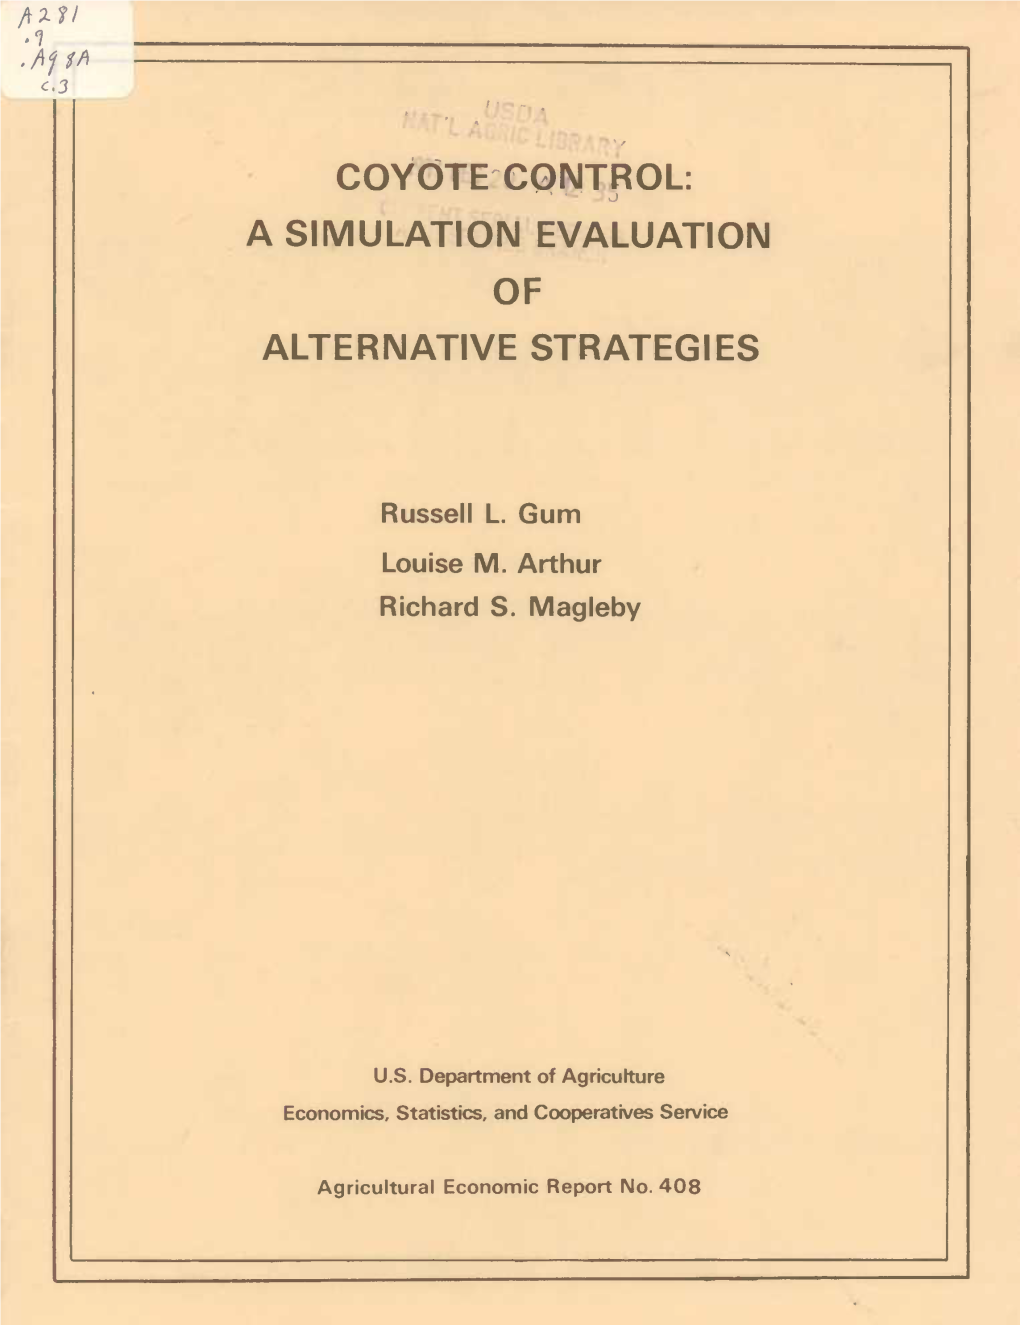 Coyote Control: a Simulation Evaluation of Alternative Strategies